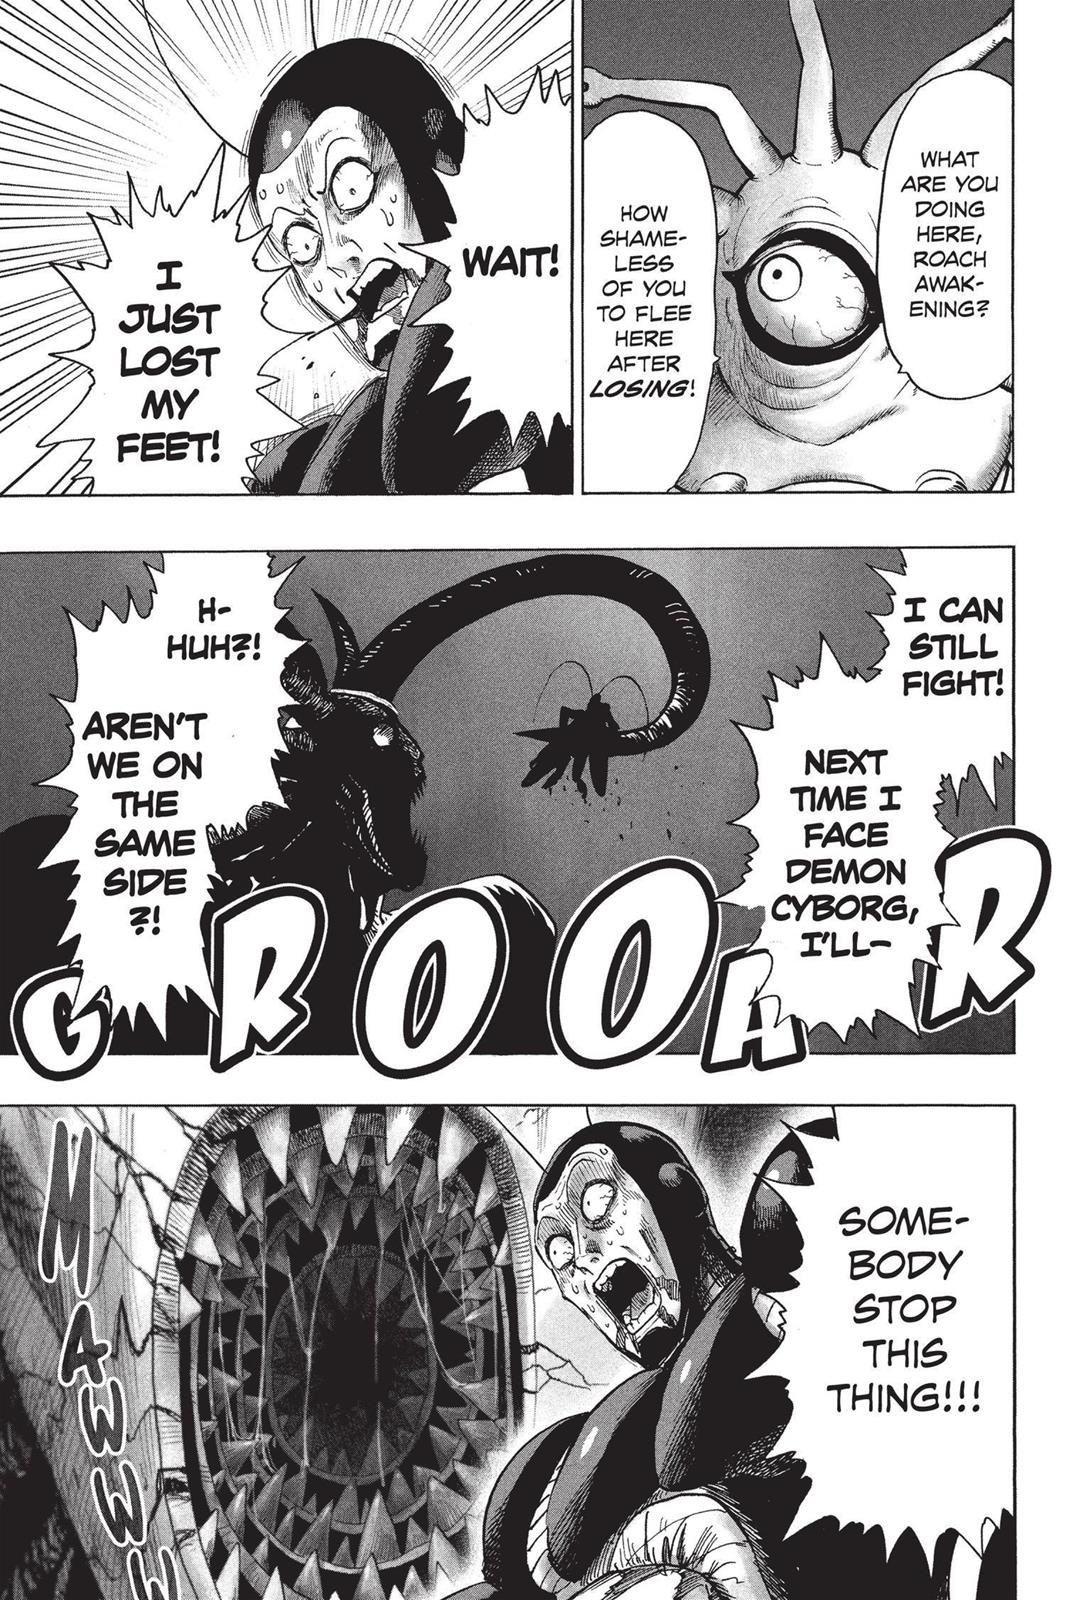 One-Punch Man, Punch 79 image 33